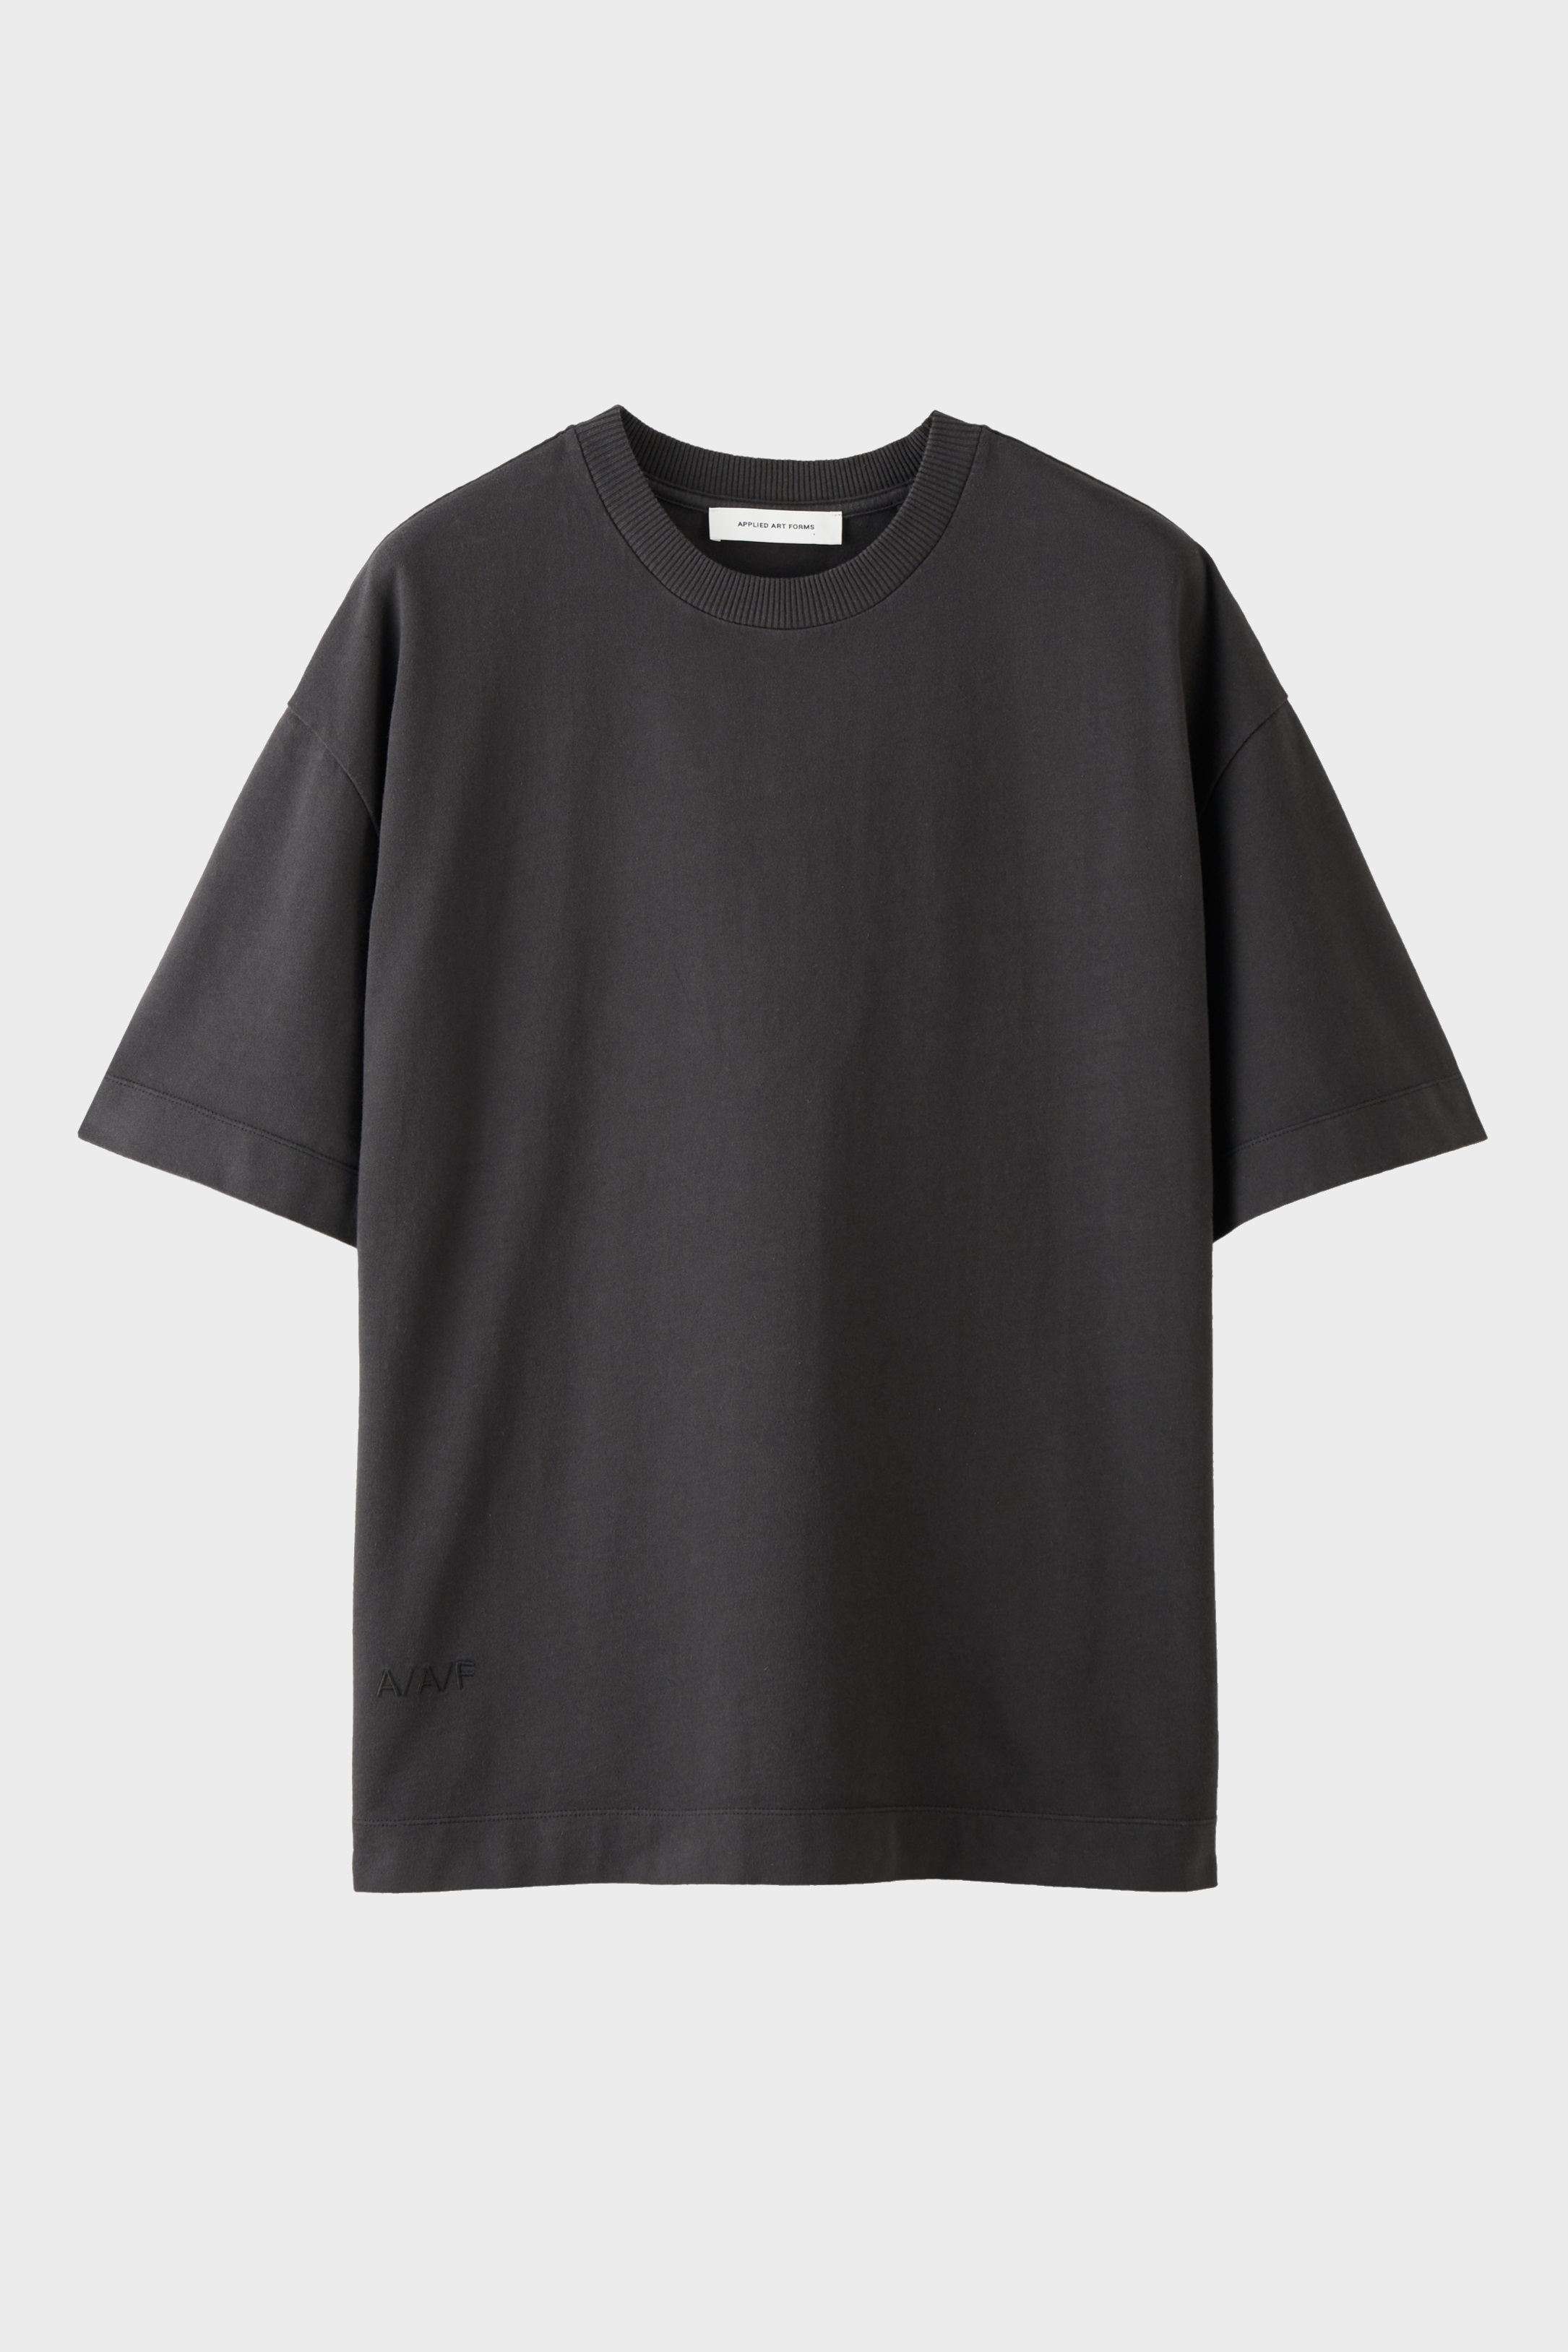 APPLIED ART FORMS Oversize T-Shirt in Charcoal